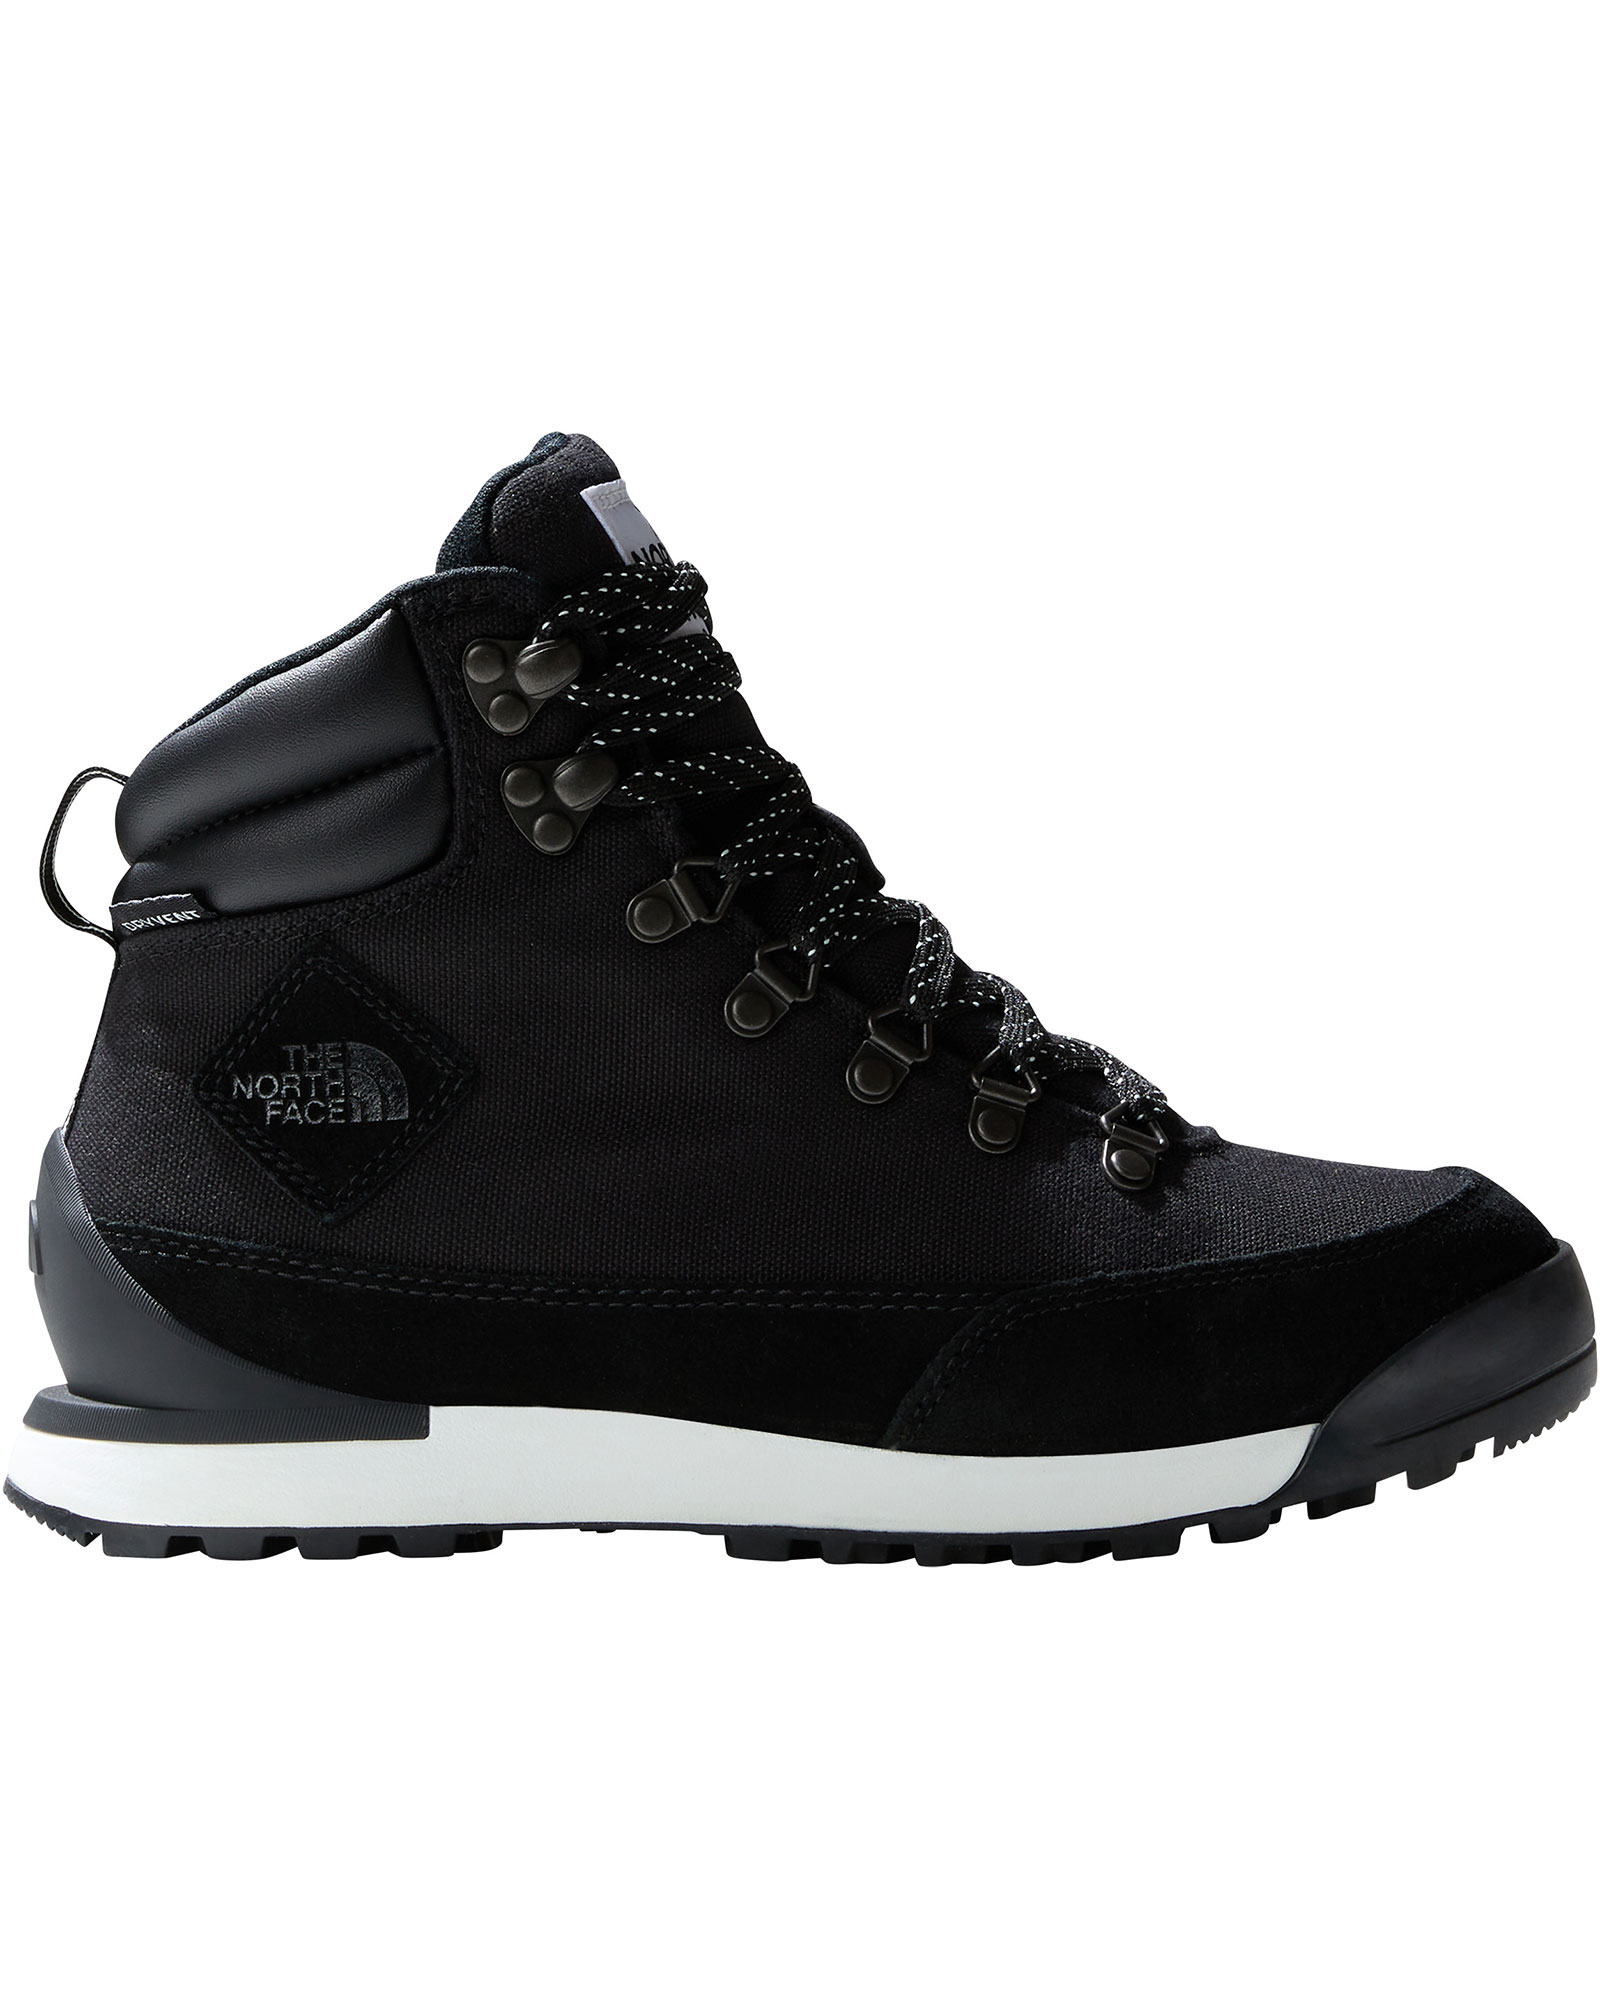 The North Face Back to Berkeley IV Textile Waterproof Women’s Boots - TNF Black/TNF White UK 7